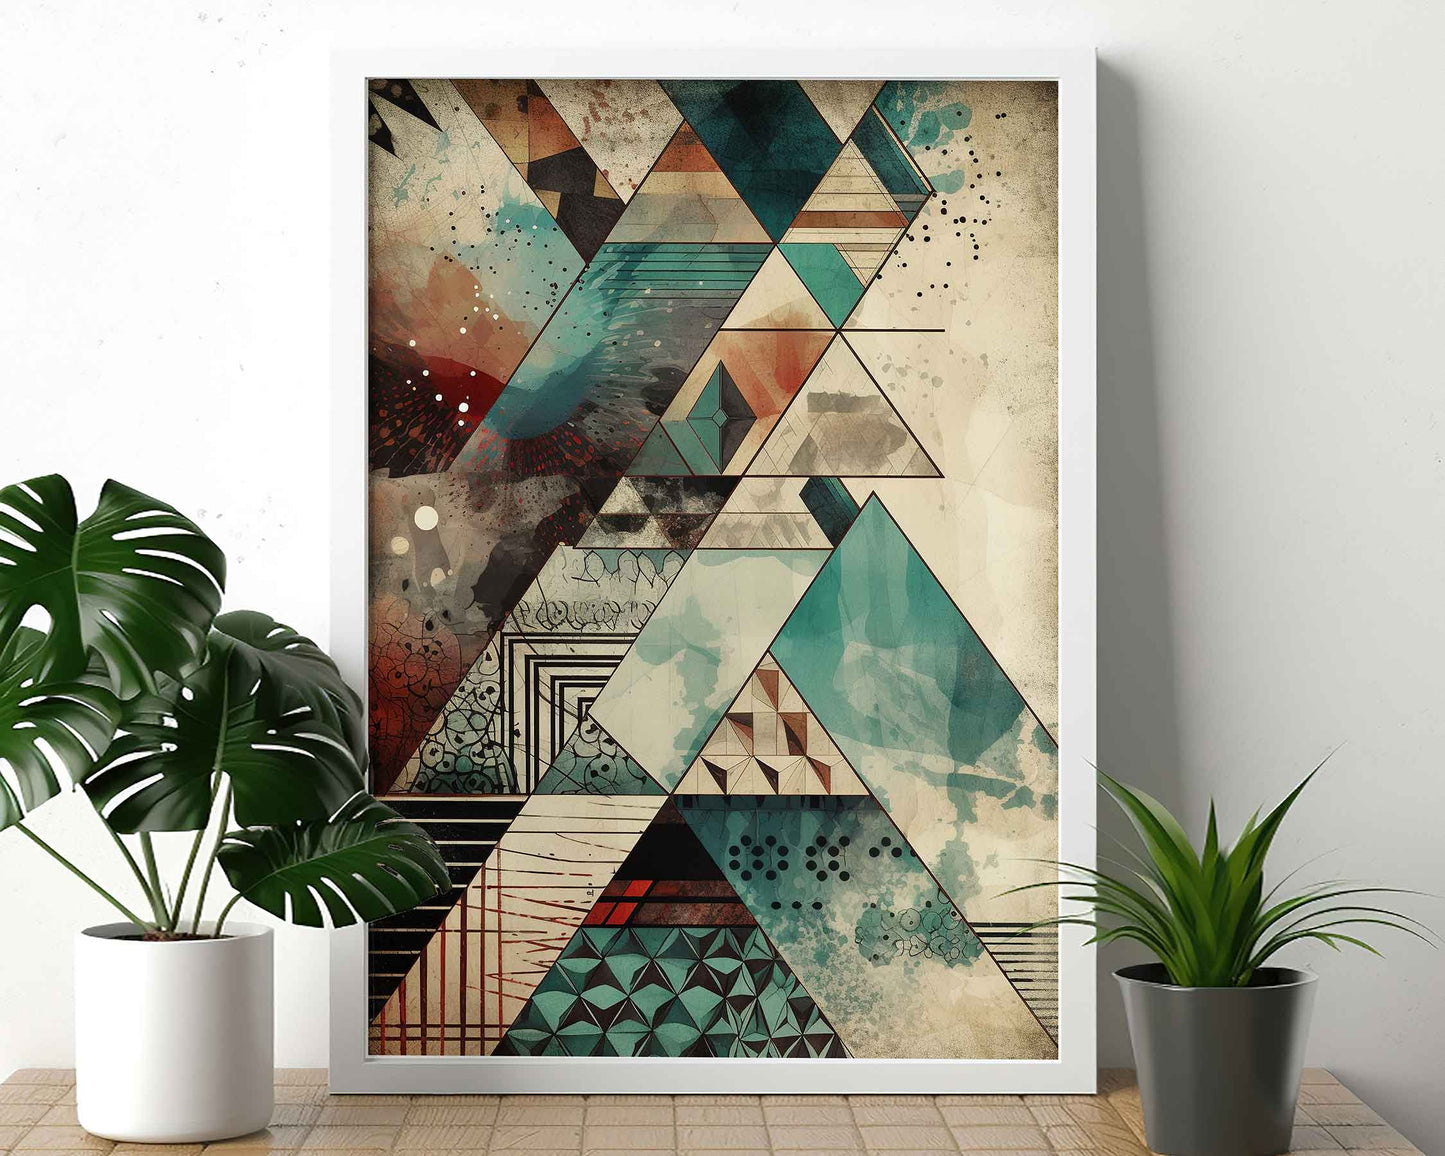 Framed Image of Boho Abstract Aztec Tribal Geometric Style Wall Art Poster Prints